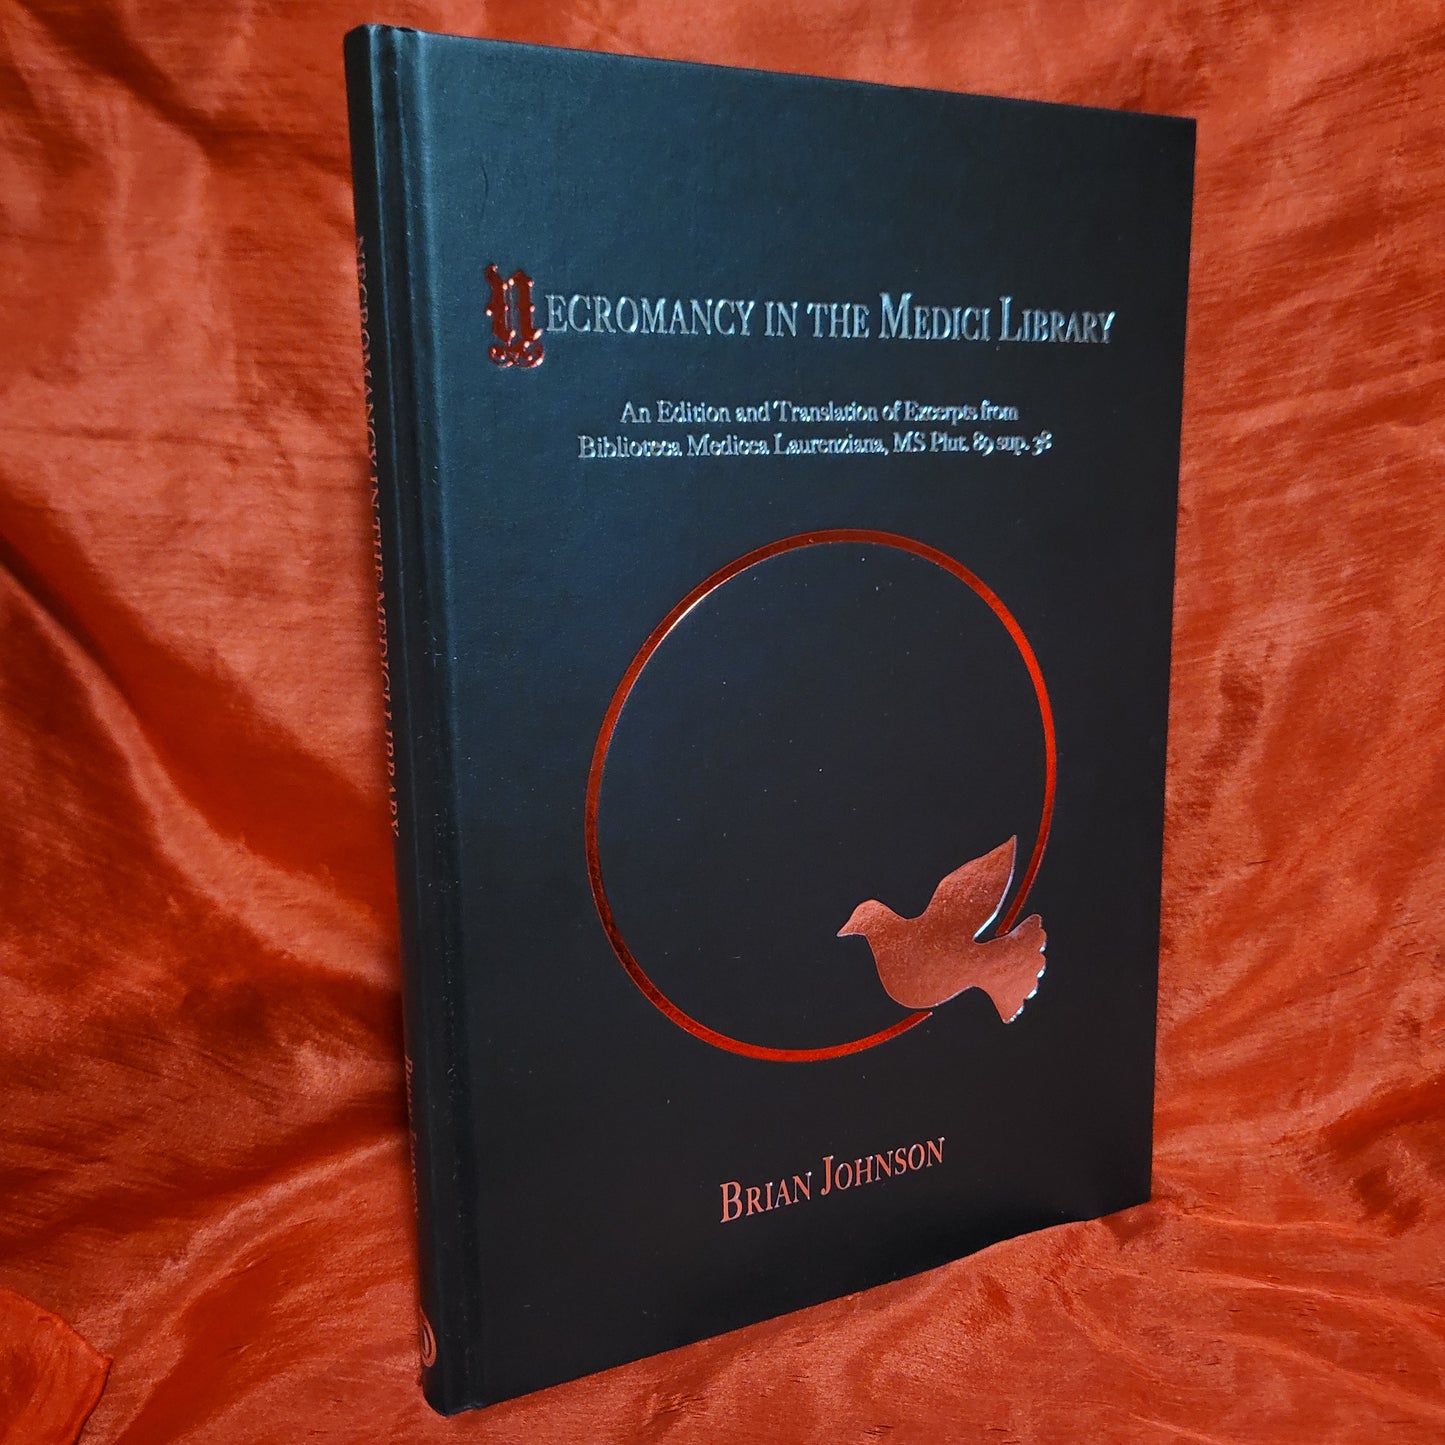 Necromancy in the Medici Library Translated by Brian Johnson (Hadean Press, 2020) Hardcover Edition